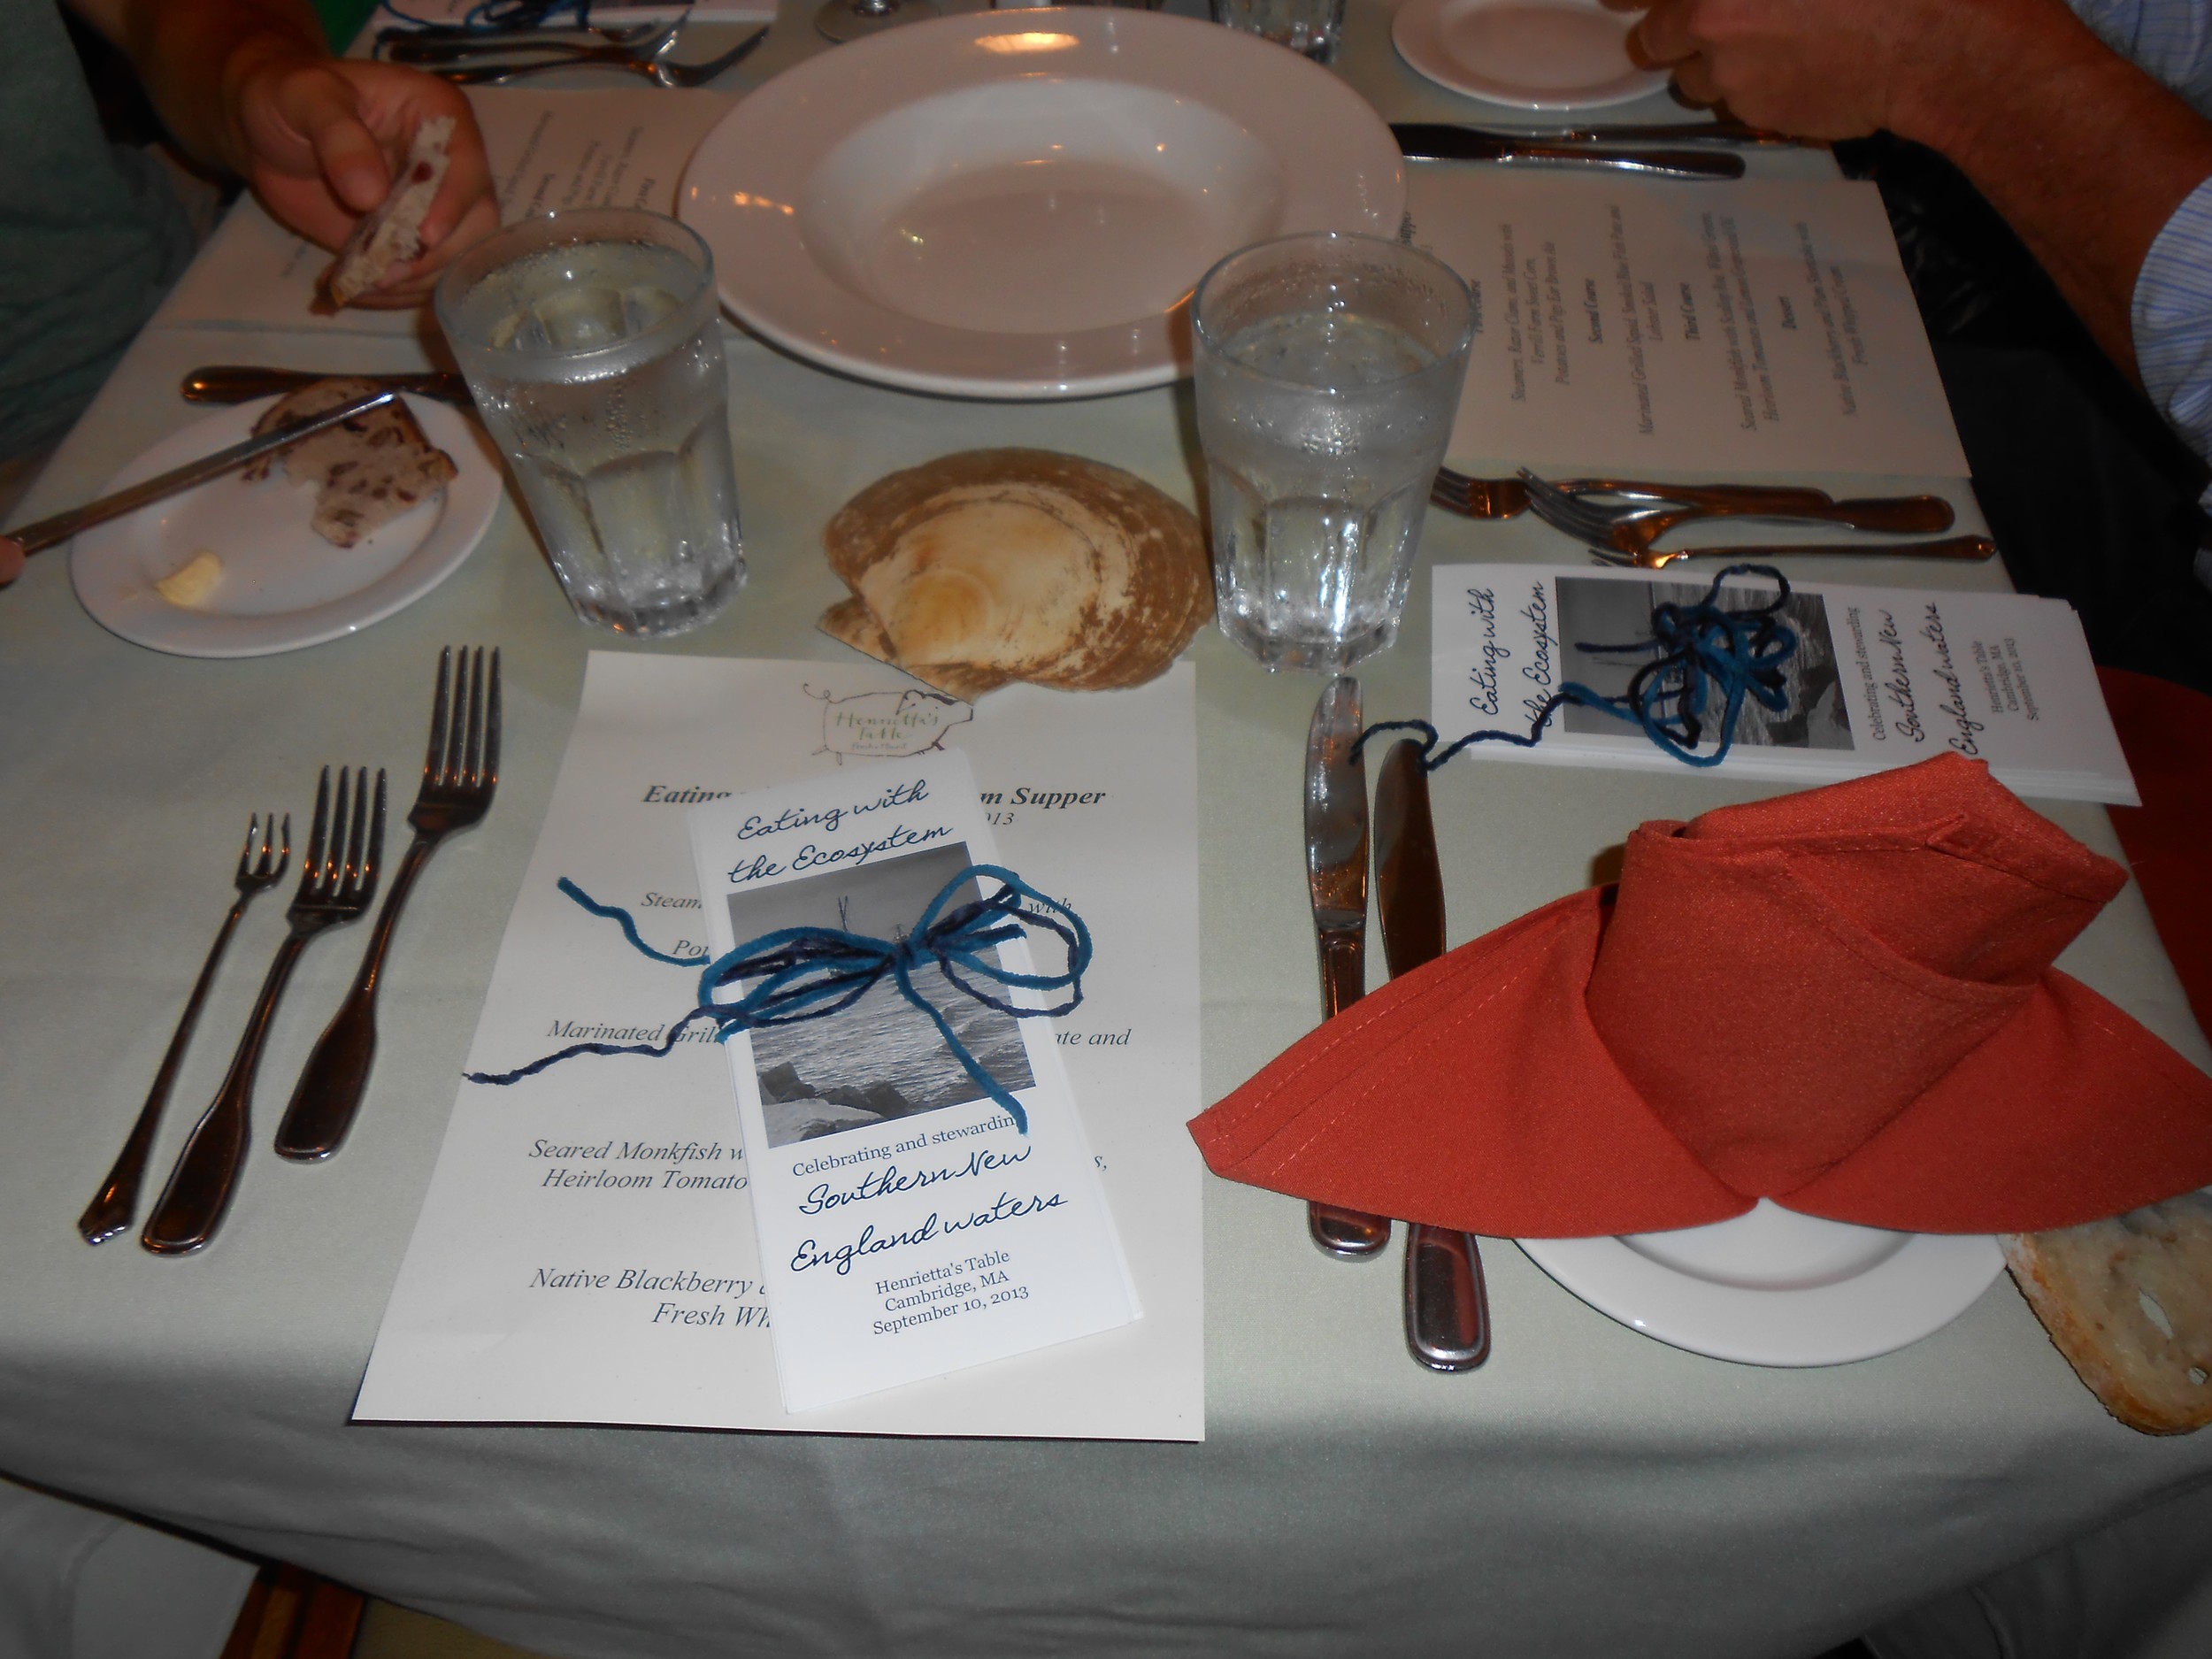 Place settings (note the little shellfish fork on the far left).